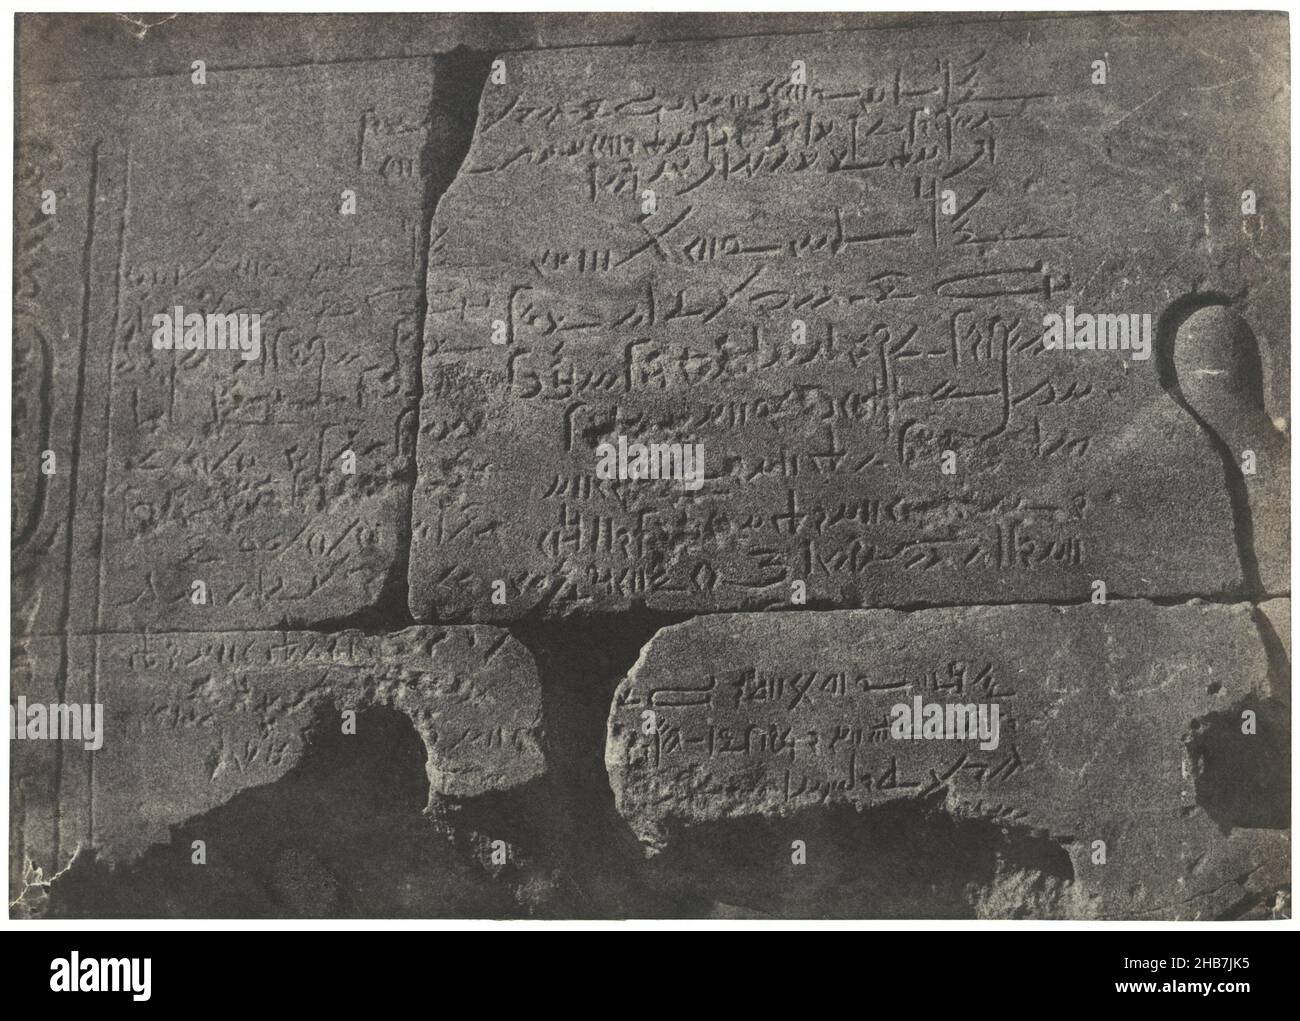 Demotic inscription in the Isis temple at Philae, Nubia. Grand Temple d'Isis, A Philoe. Inscription démotique, Egypt, Nubie, Palestine et Syrie. Dessins photographiques (series title), Maxime Du Camp, (mentioned on object), printer: Louis-Désiré Blanquart-Evrard, (mentioned on object), Philae, printer: Lille, publisher: Paris, Edinburgh, 1849 - 1851 and, or 1852, paper, cardboard, salted paper print, height 161 mm × width 225 mm, height 312 mm × width 448 mm Stock Photo